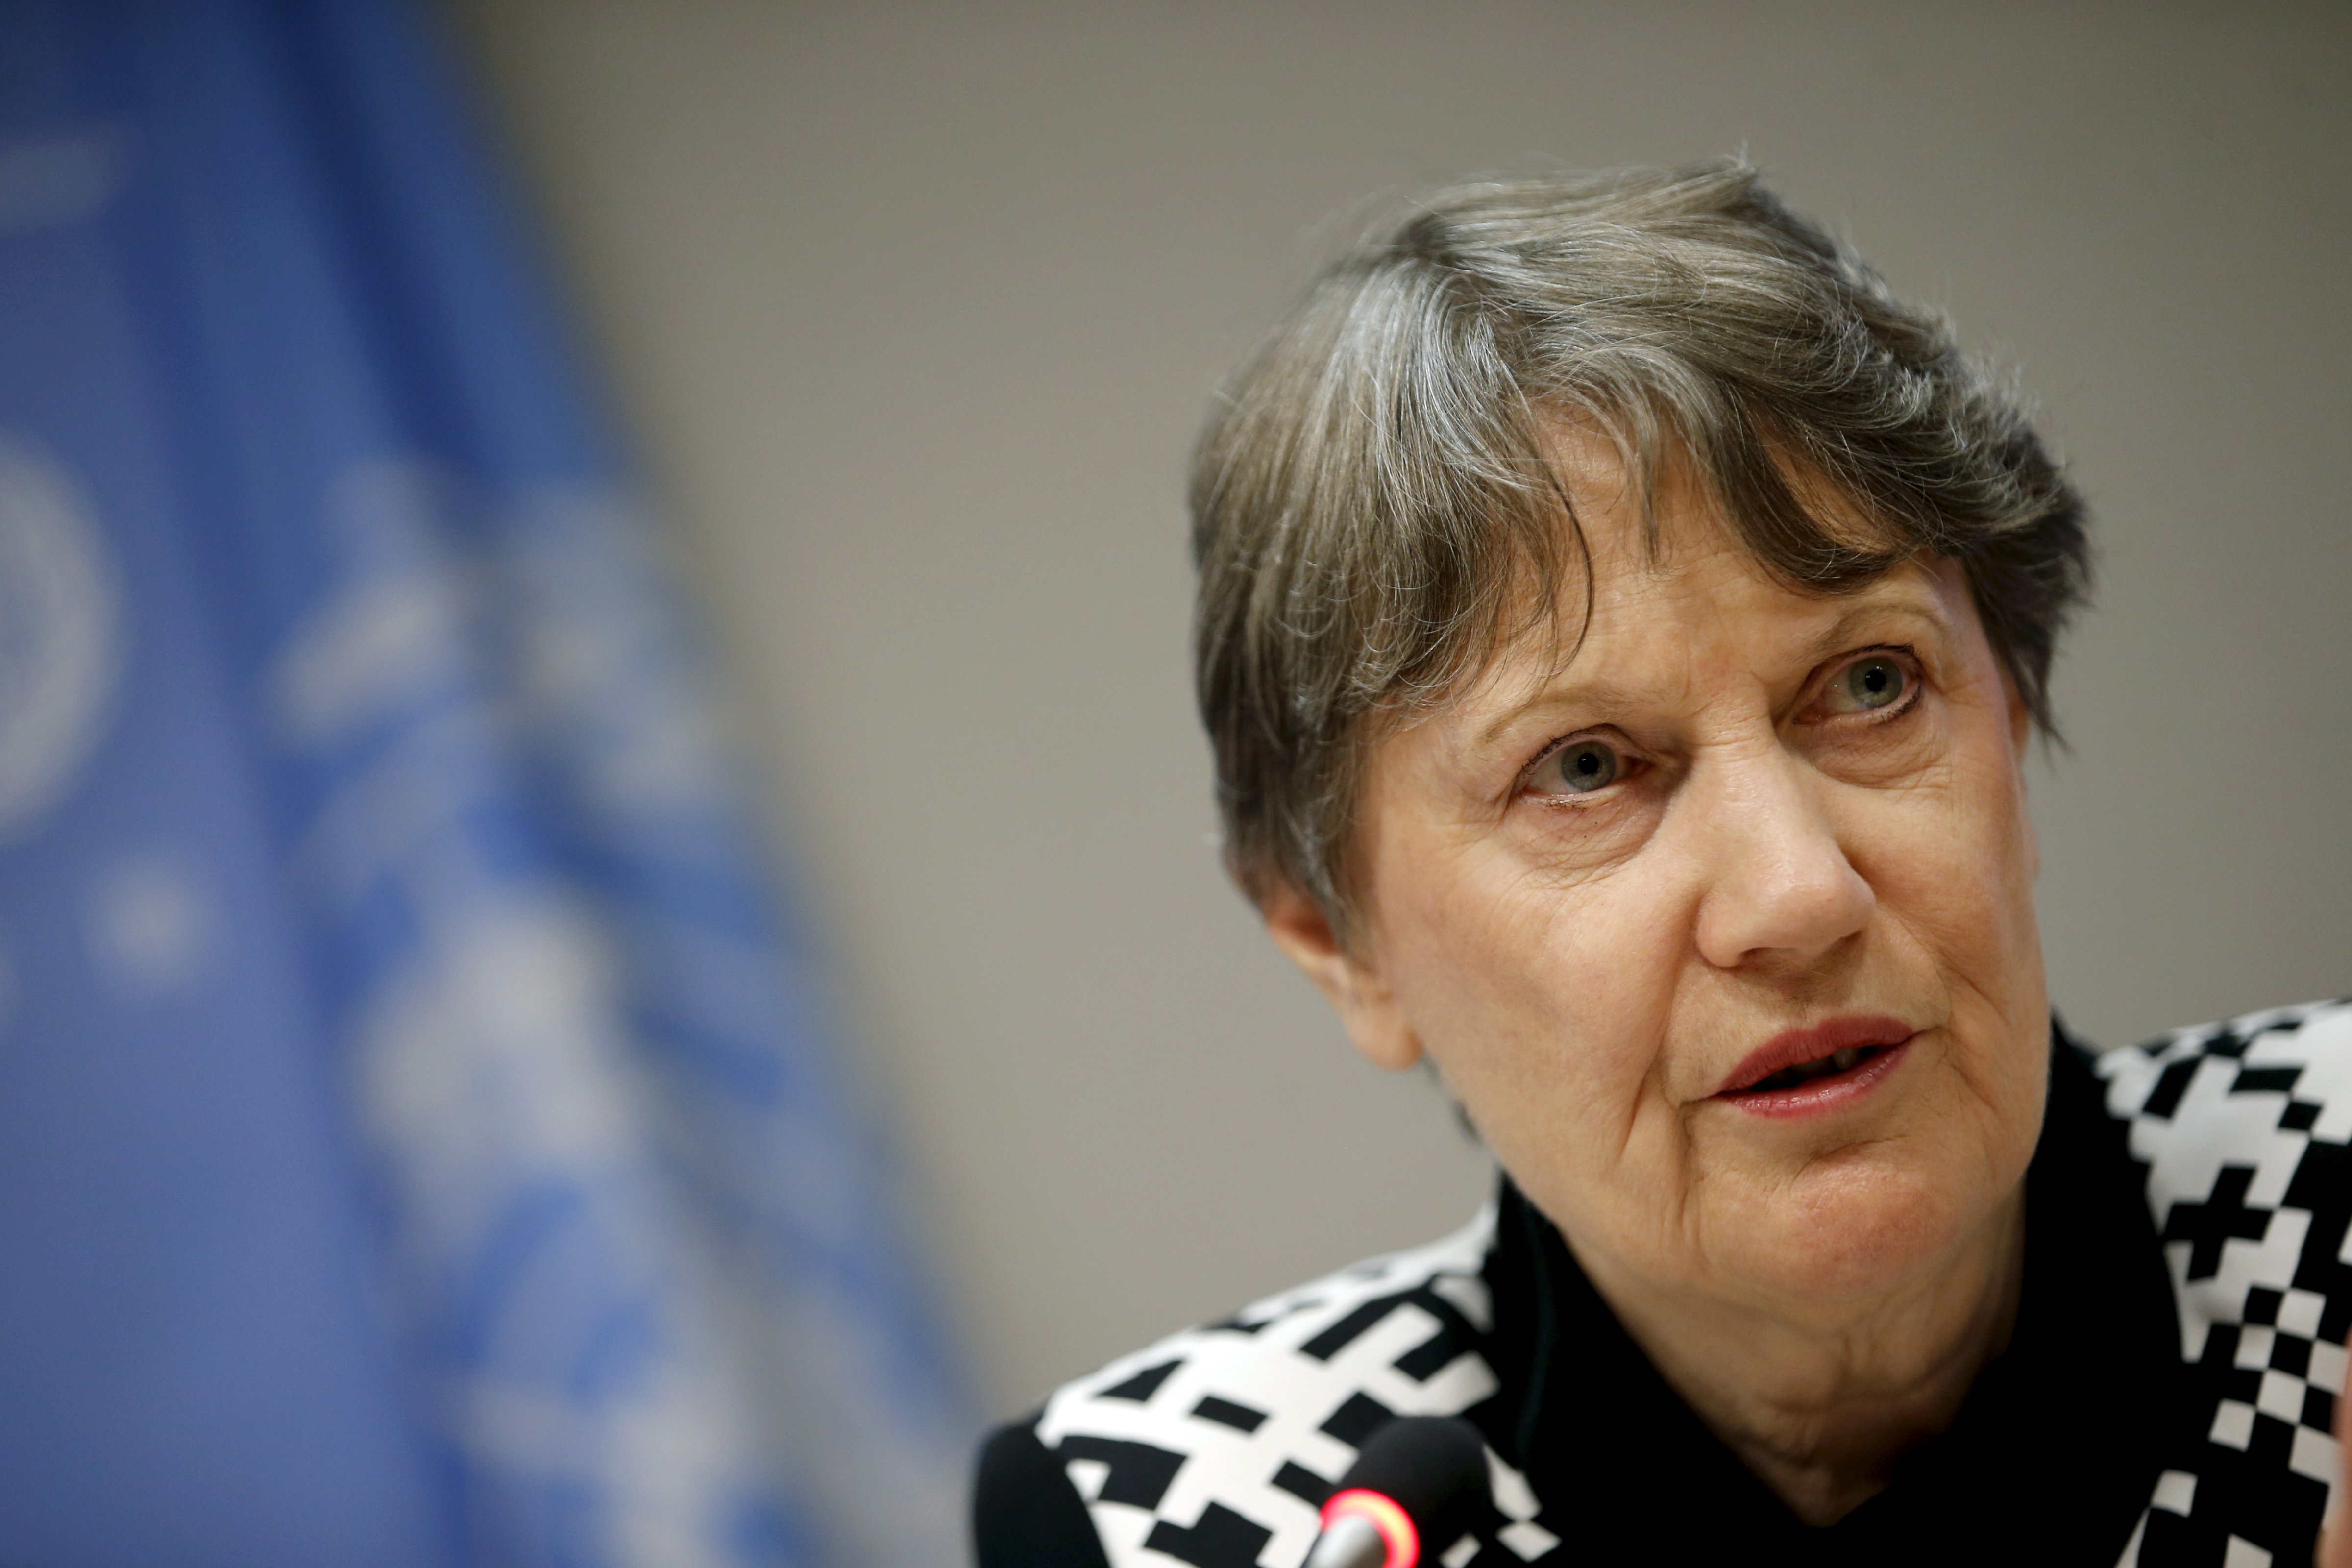 U.N. Development Programme Administrator Helen Clark speaks at a news conference at the U.N.'s headquarters in New York City on Sept. 21, 2015 (Mike Segar—Reuters)